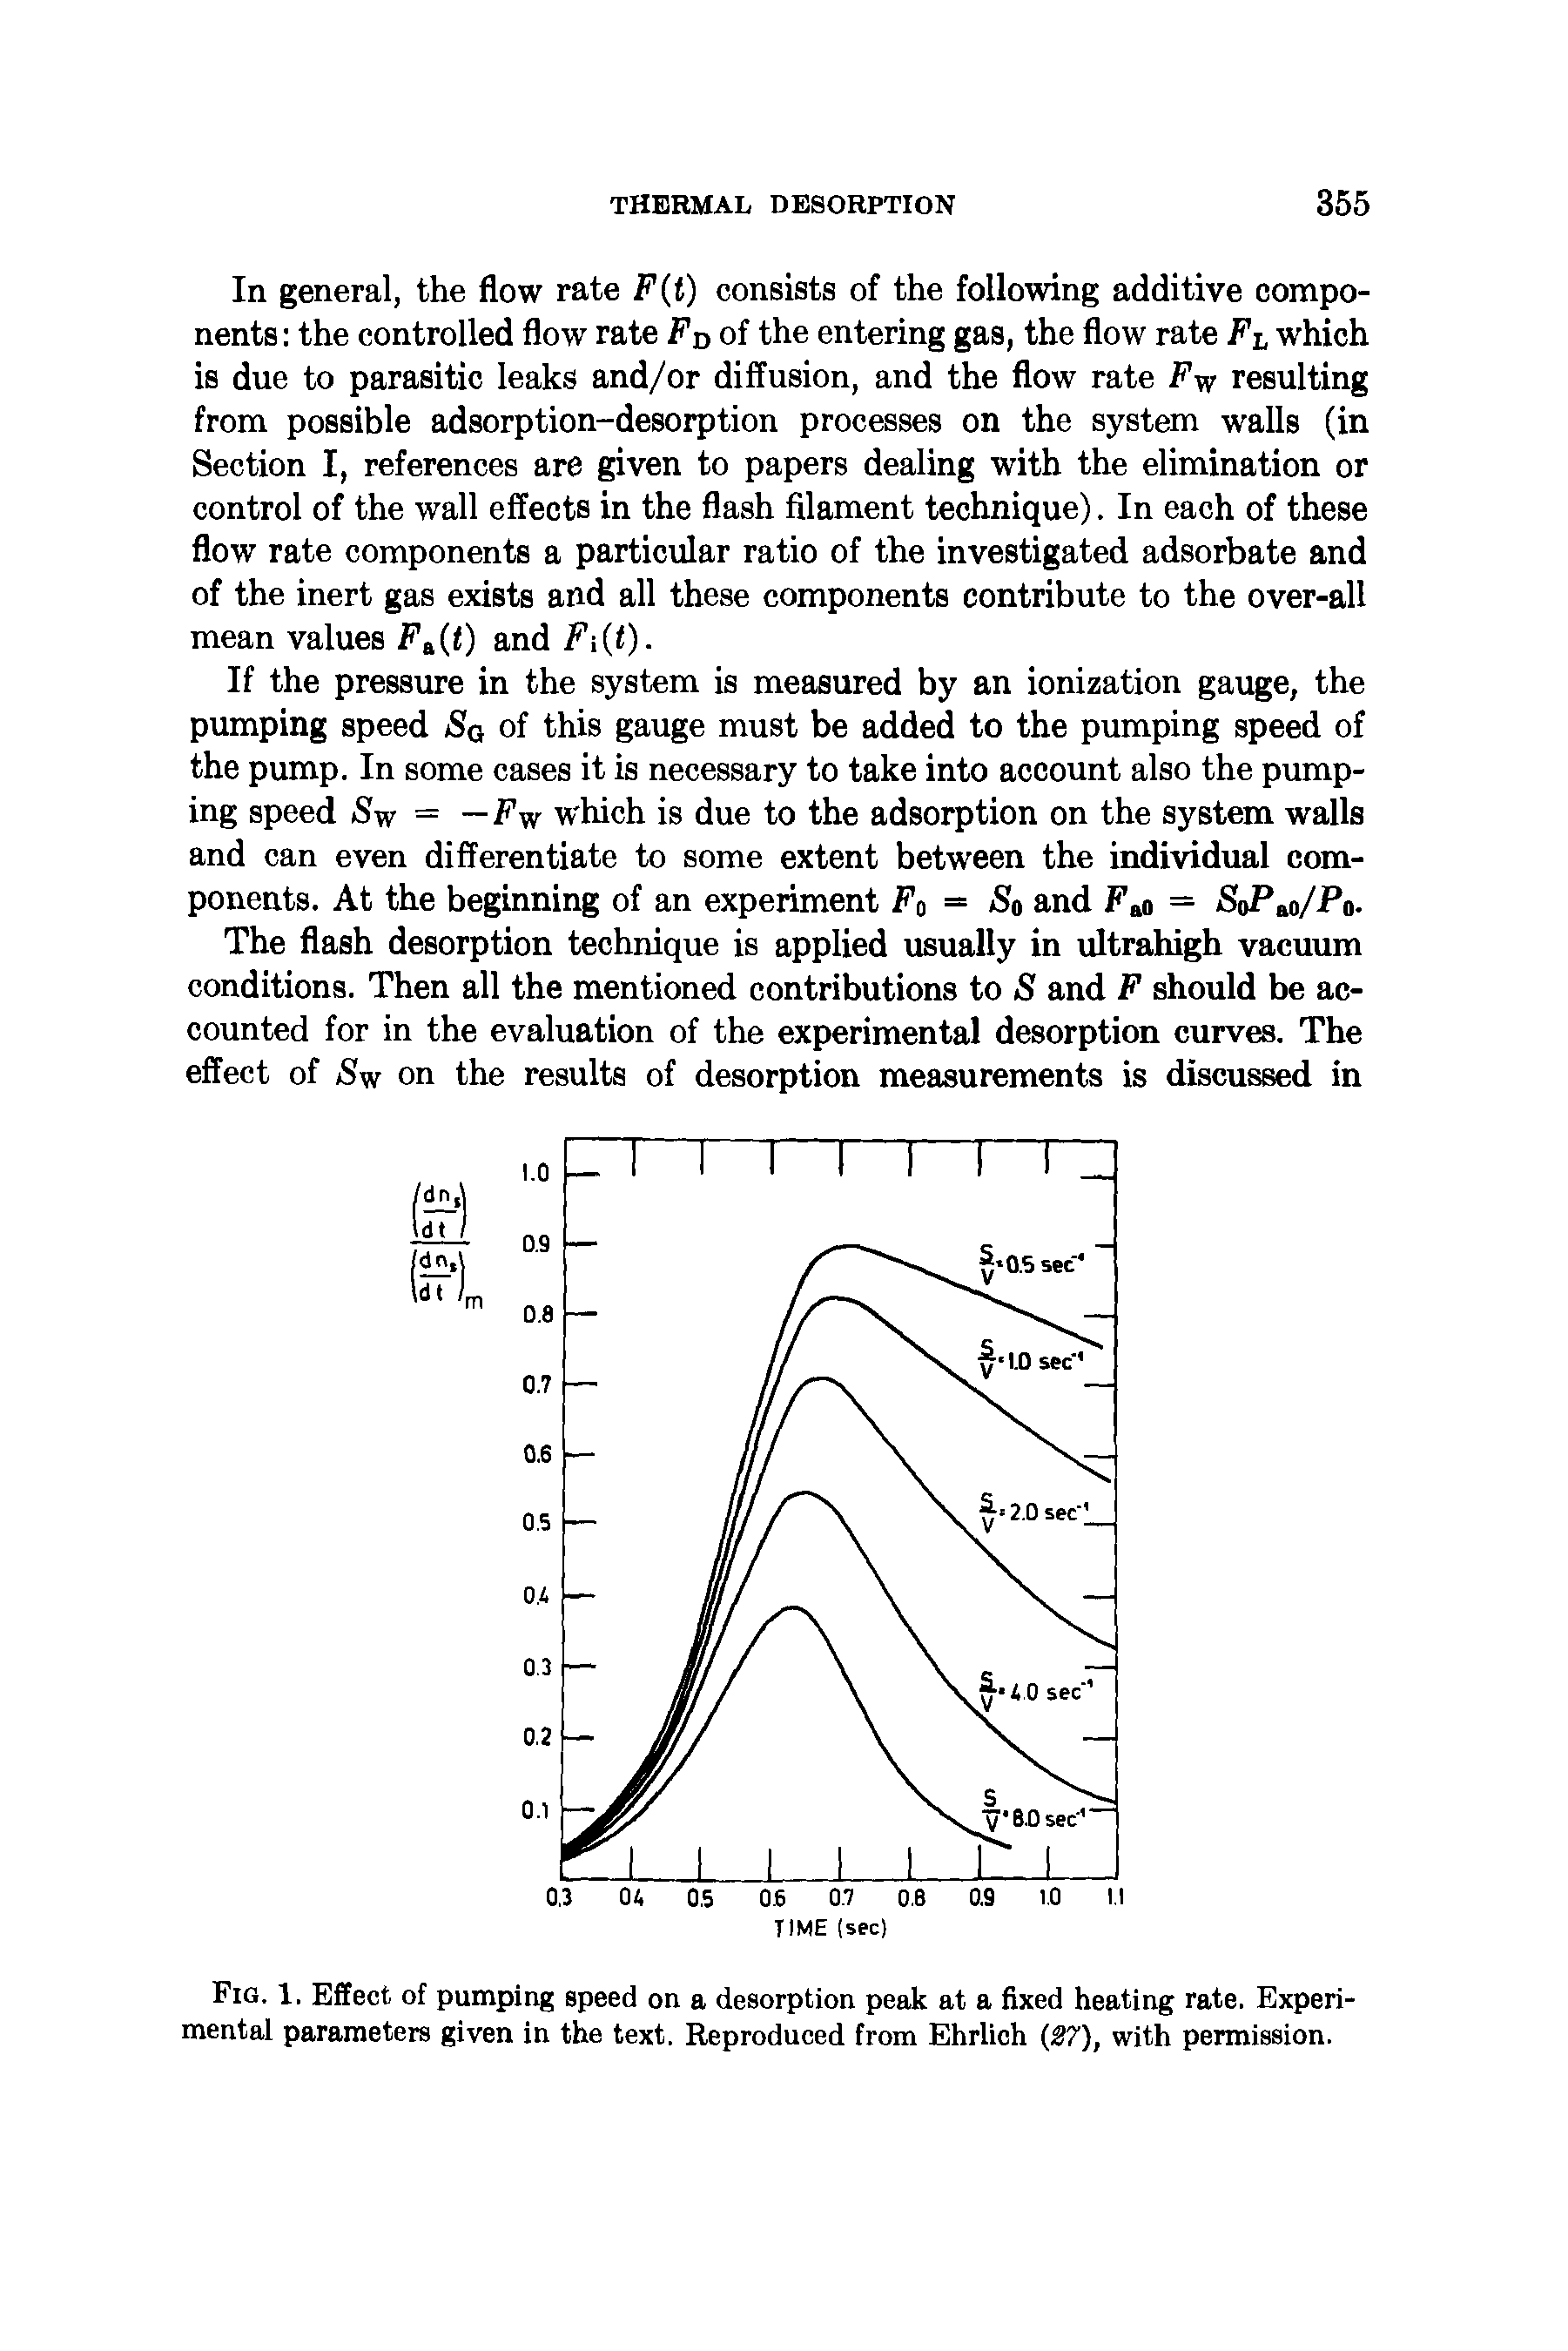 Fig. 1. Effect of pumping speed on a desorption peak at a fixed heating rate. Experimental parameters given in the text. Reproduced from Ehrlich (27), with permission.